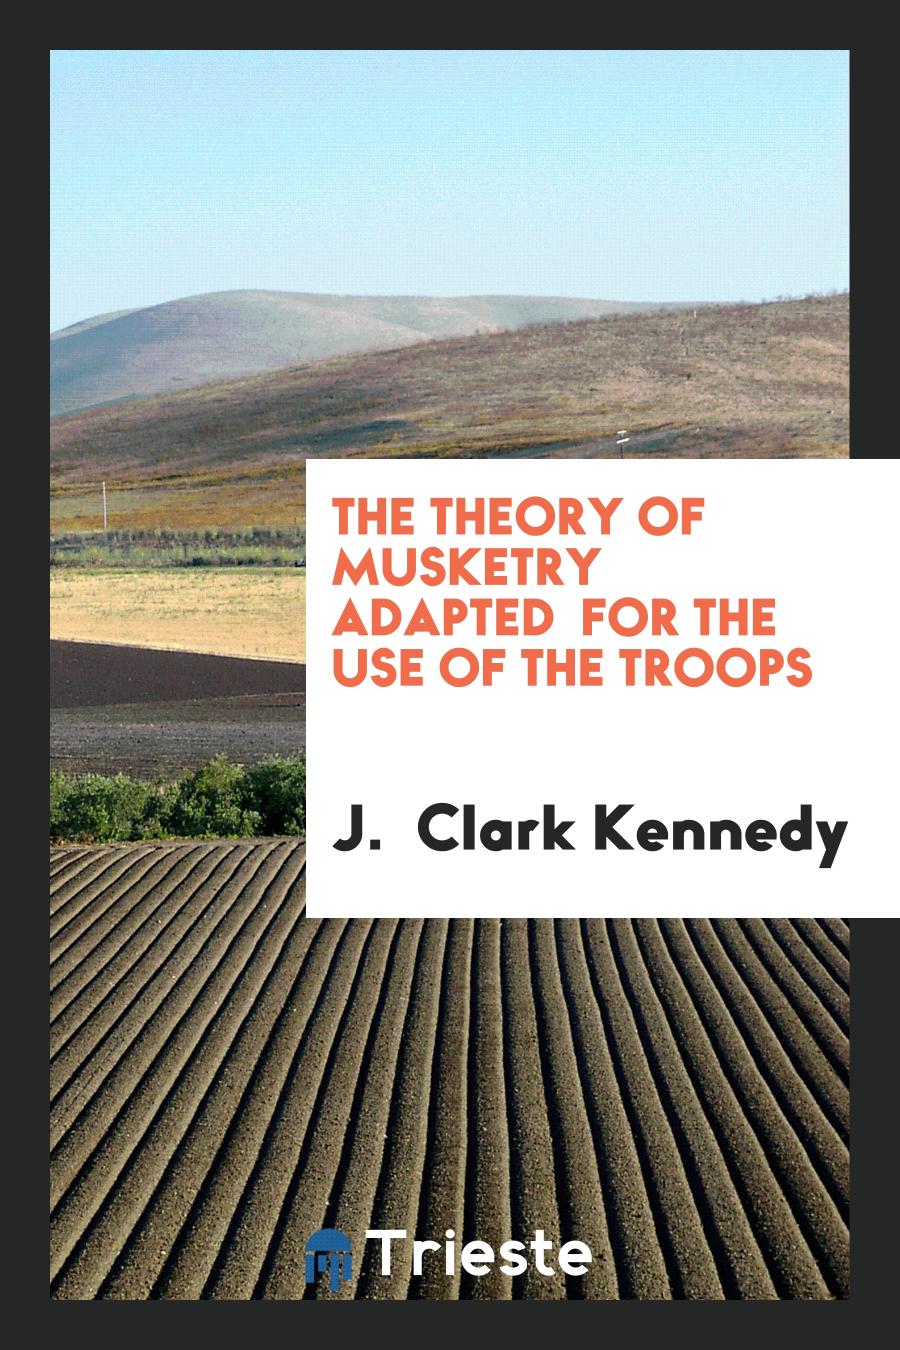 The theory of musketry adapted for the use of the troops